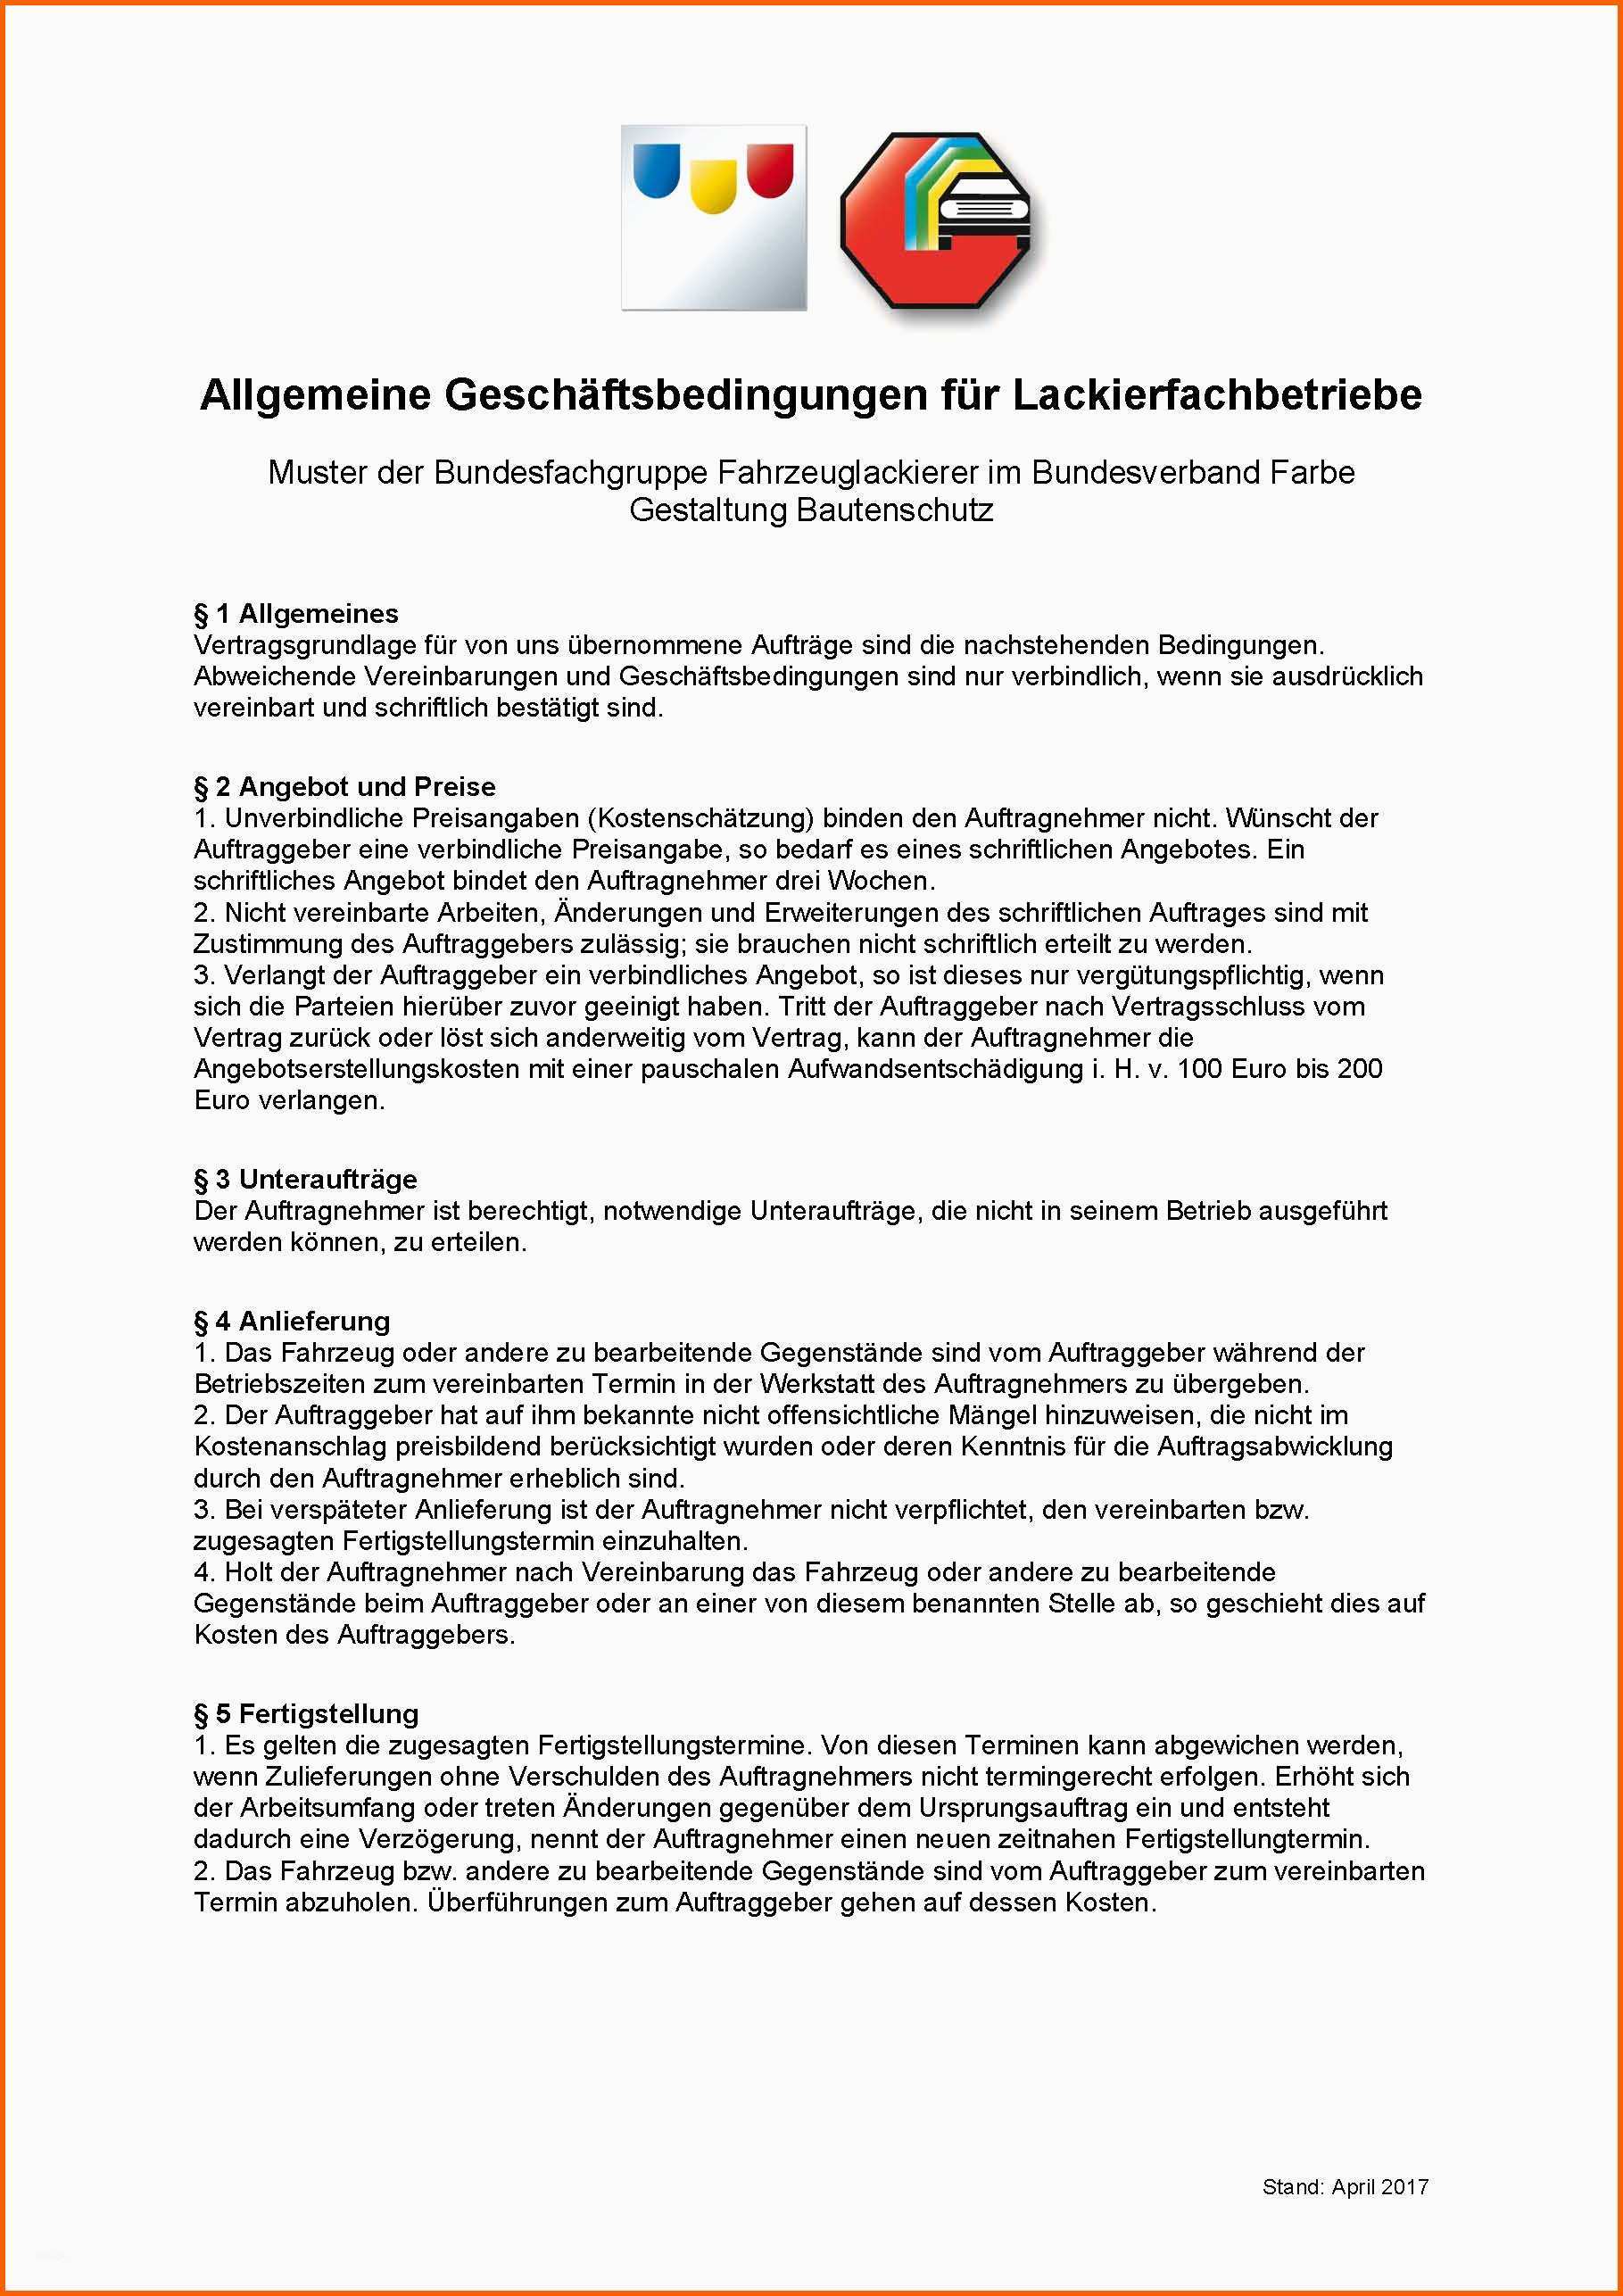 agb fuer lackierfachbetriebe ueberarbeitet stand april 2017